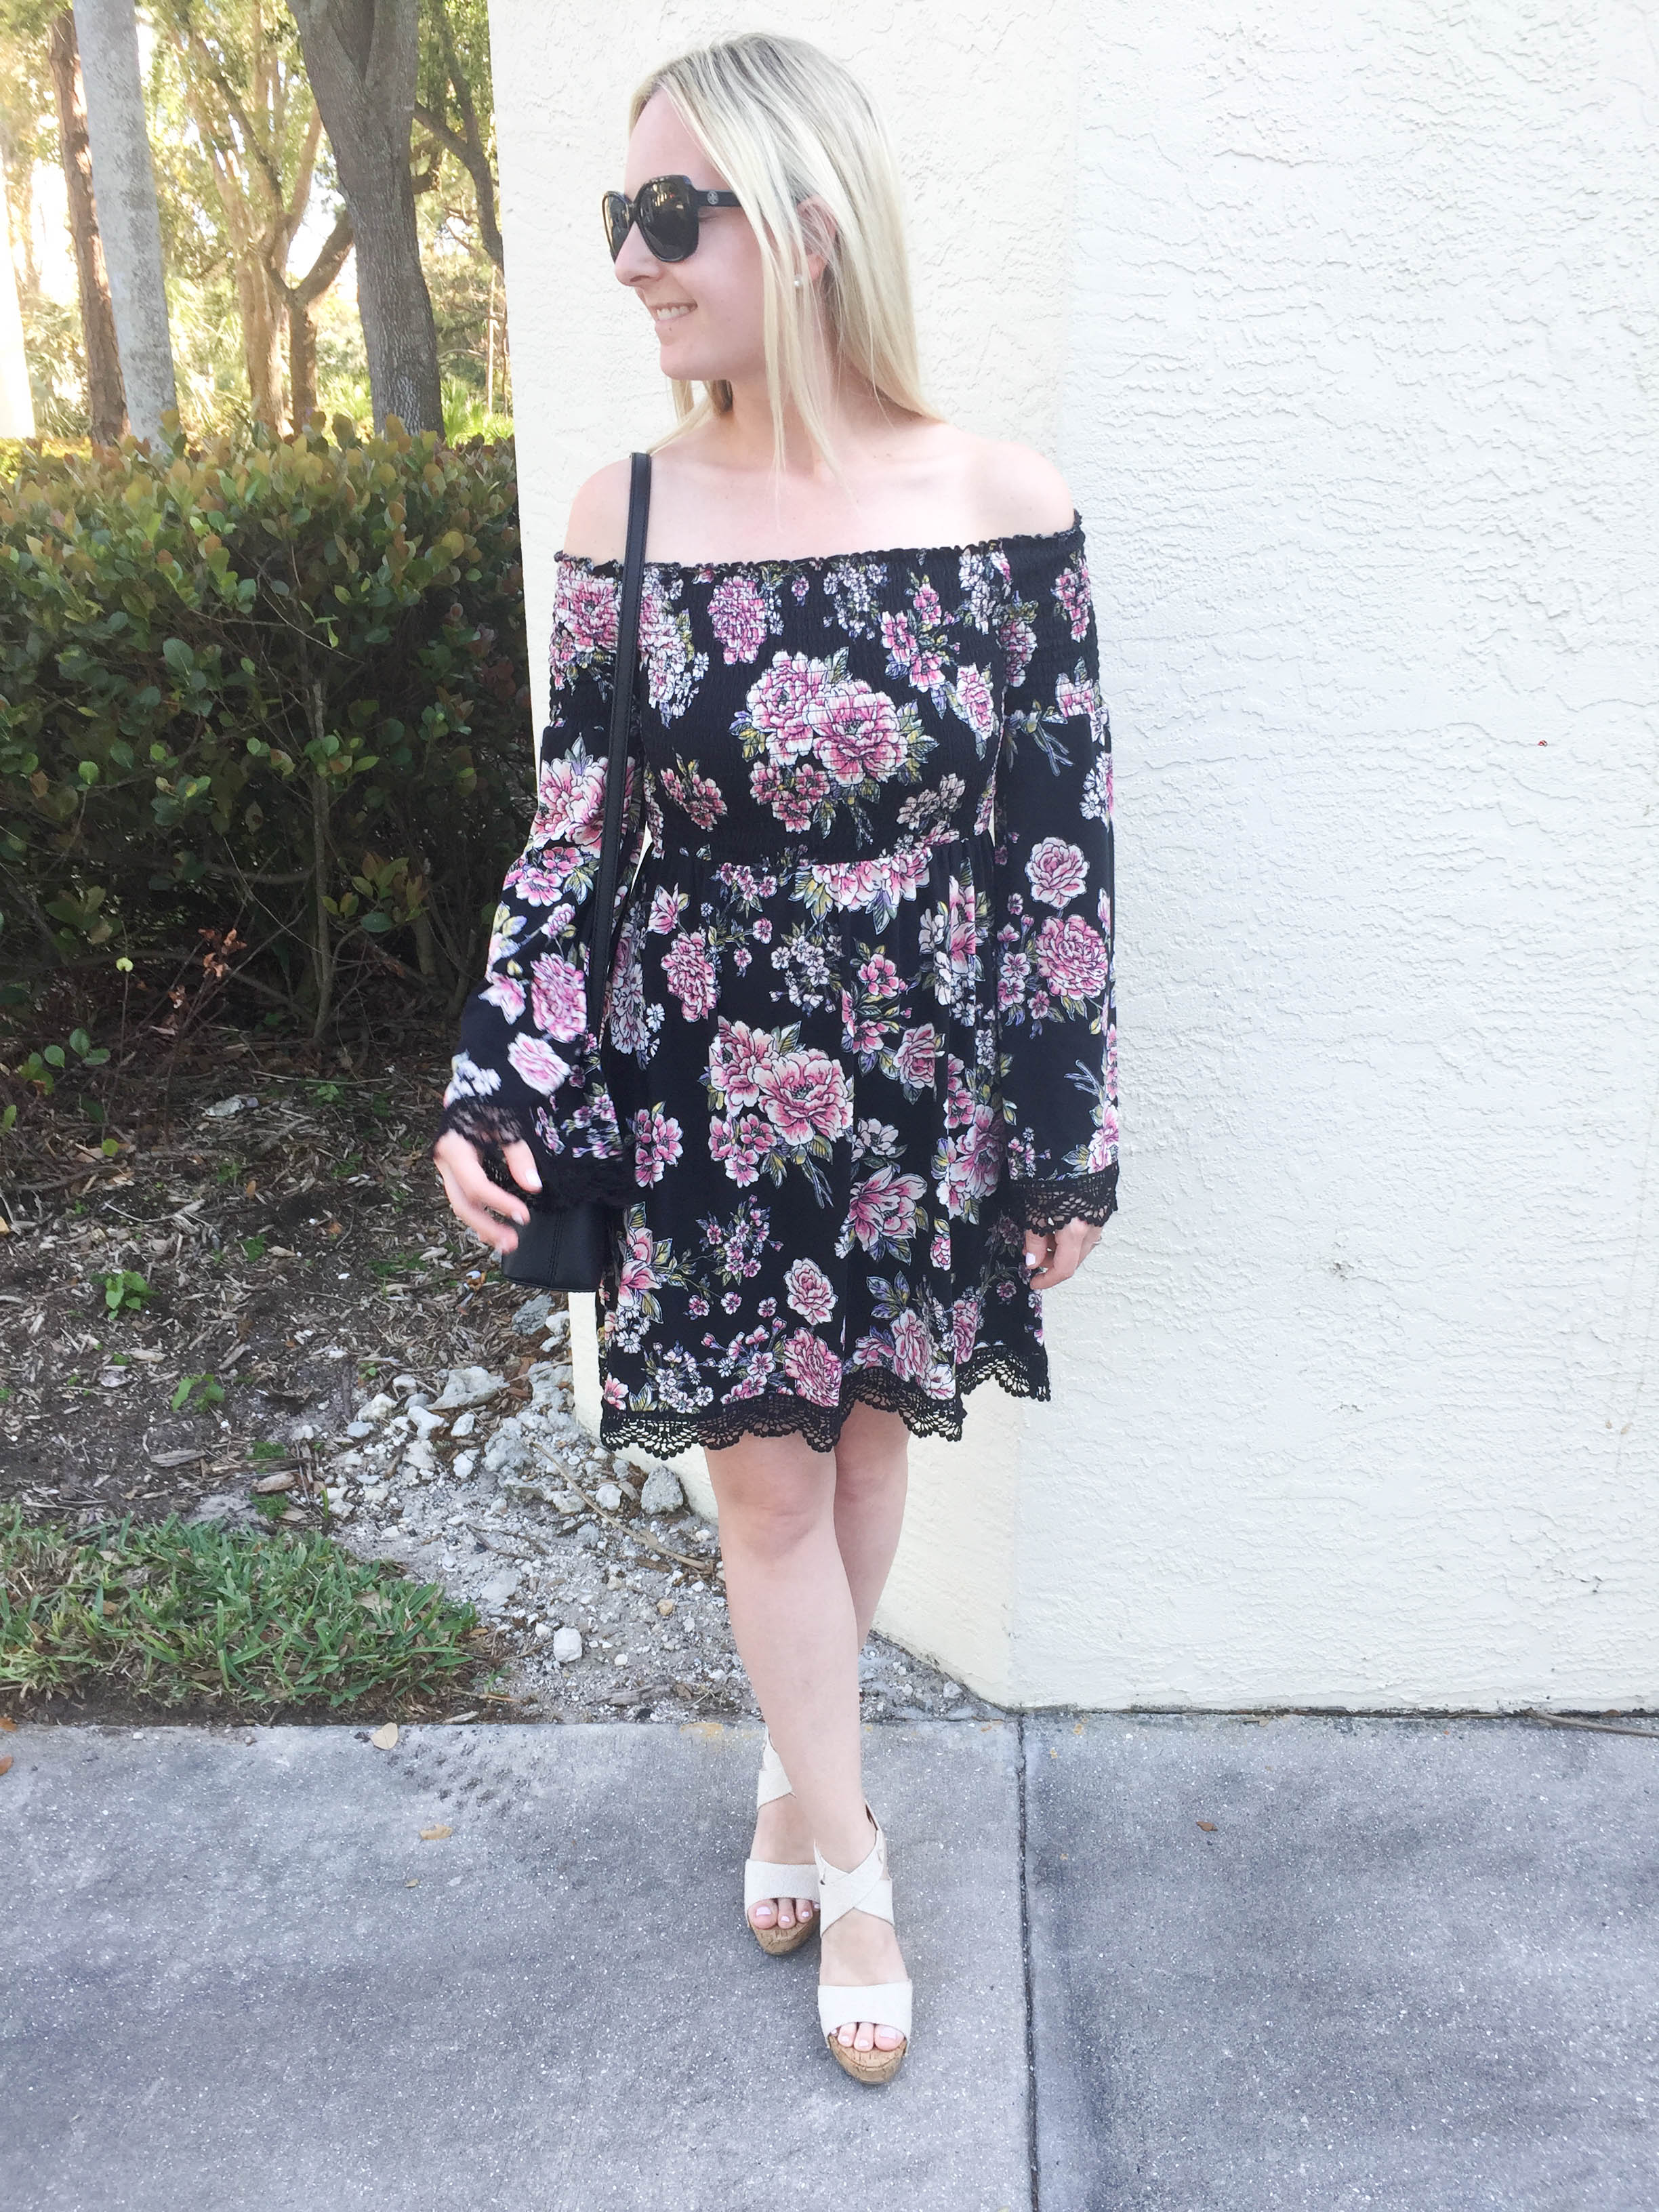 Target Off the Shoulder Dress on Livin' Life with Style 